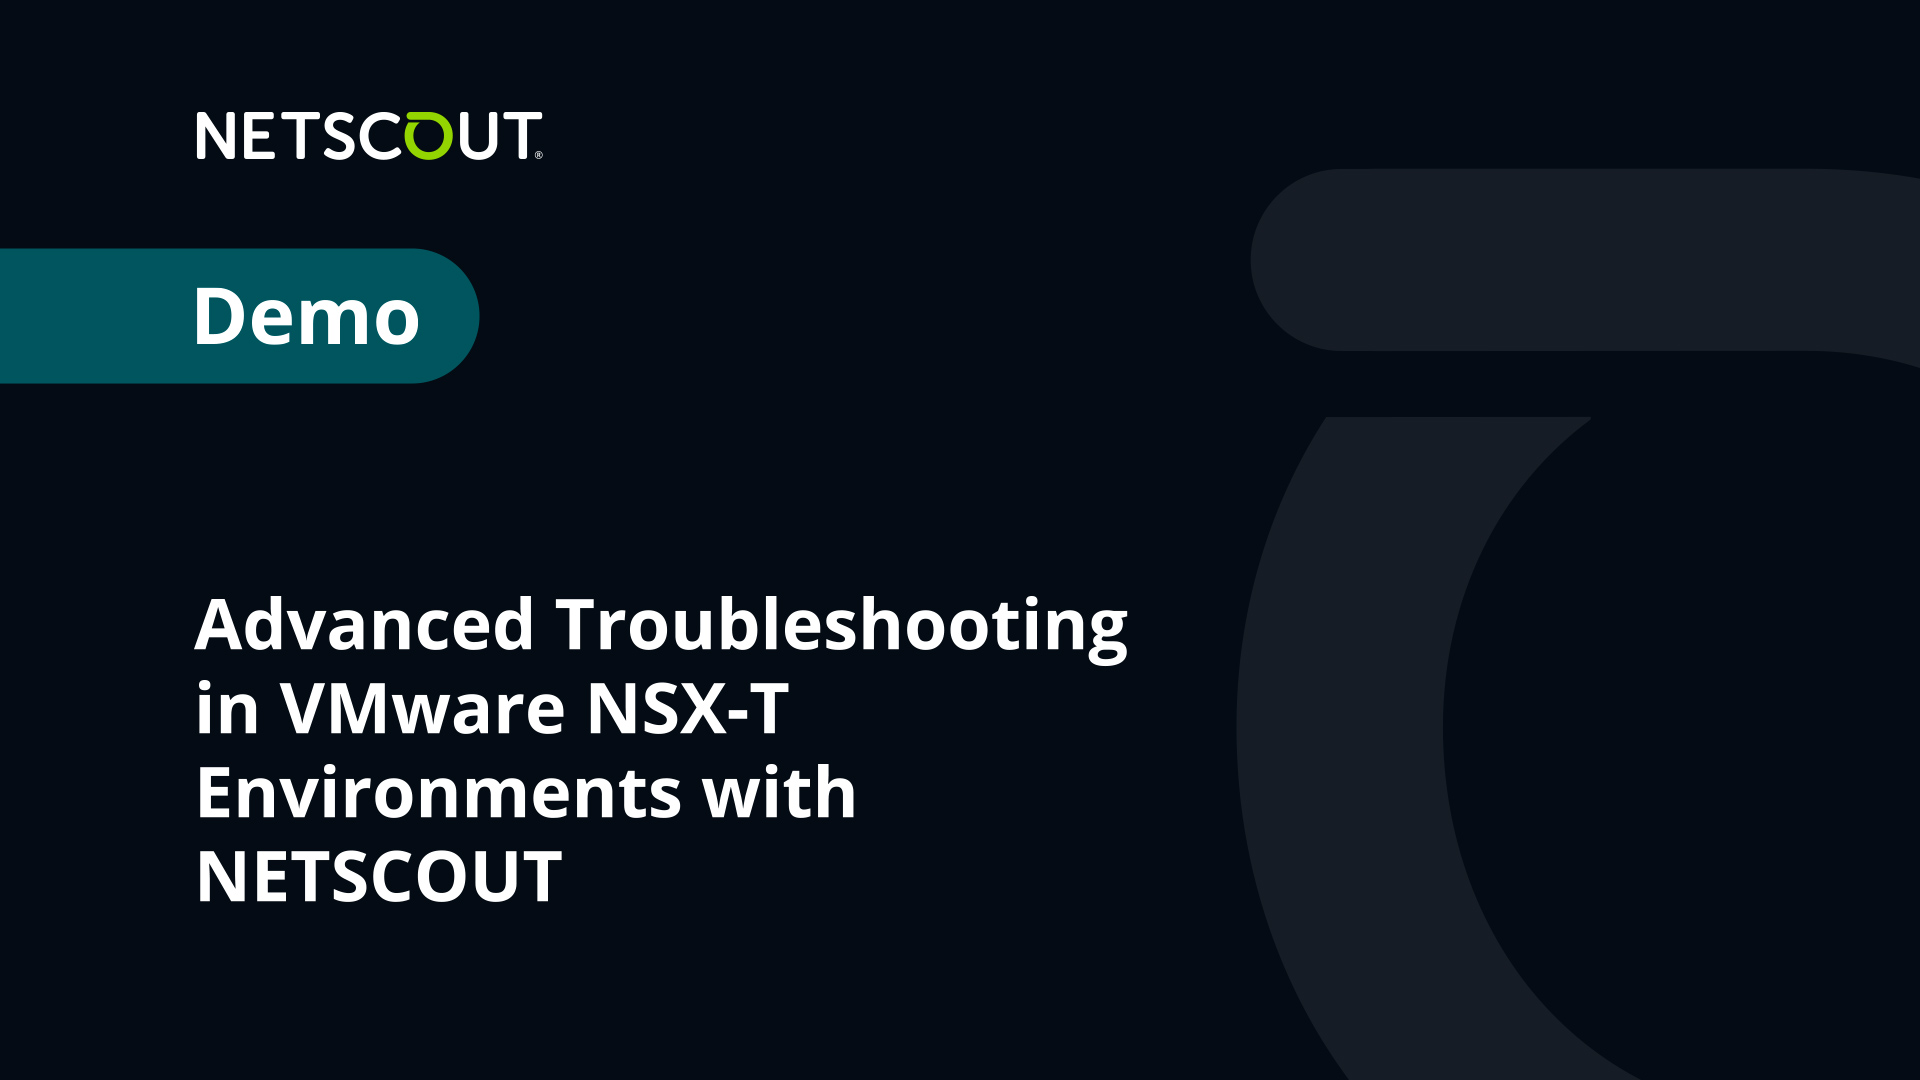 Advanced Troubleshooting in VMware NSX-T Environments with NETSCOUT